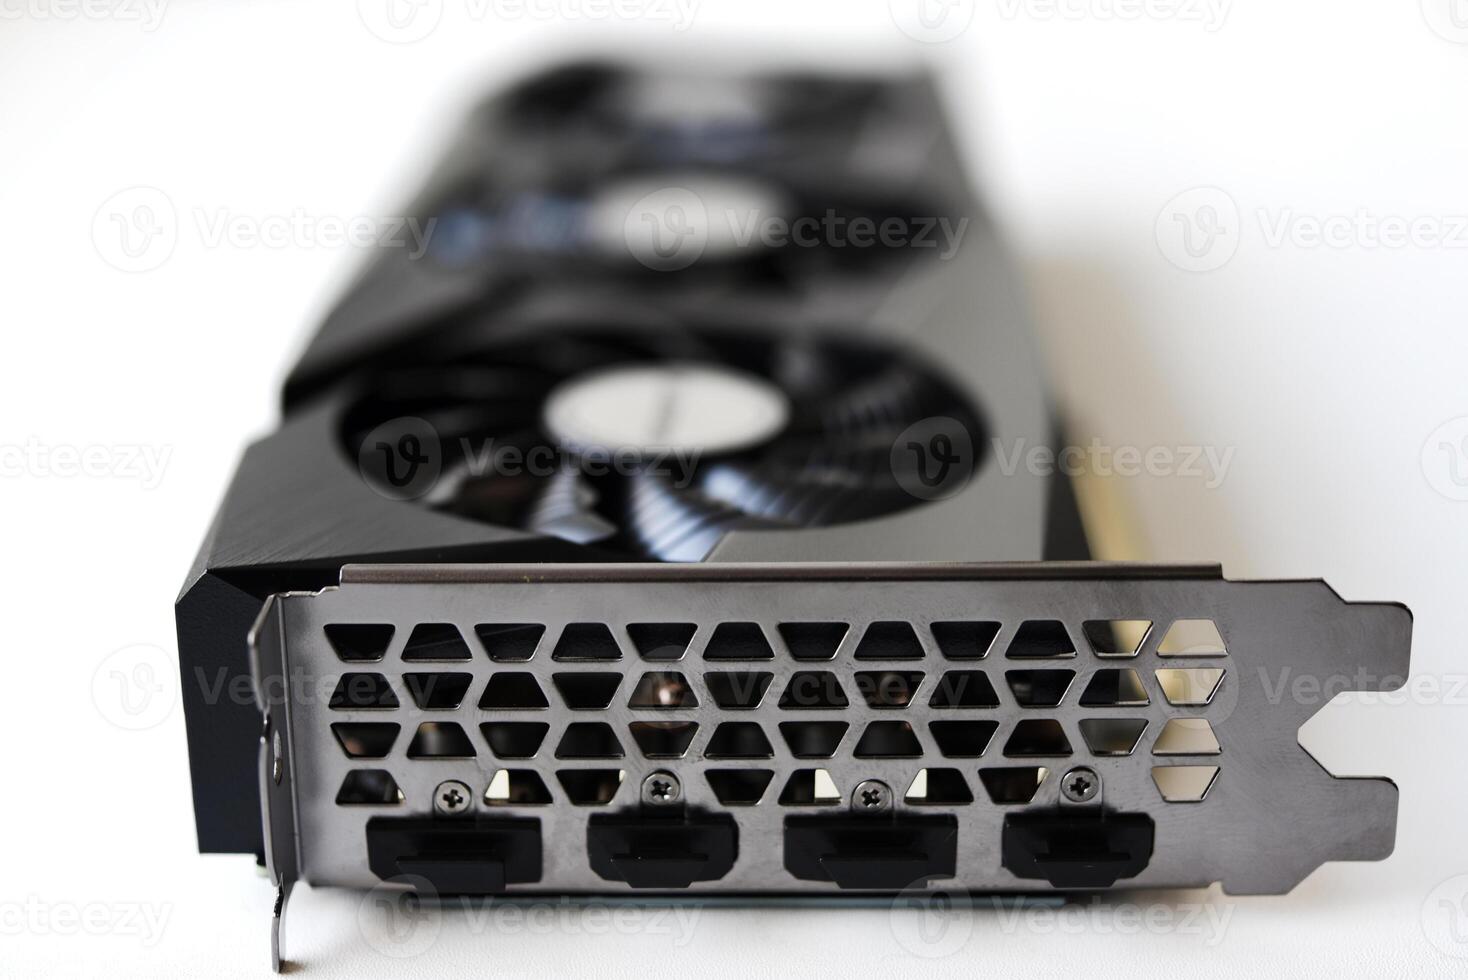 A black and white video card on a white background. Fans and the graphics card case. Computer accessories. photo